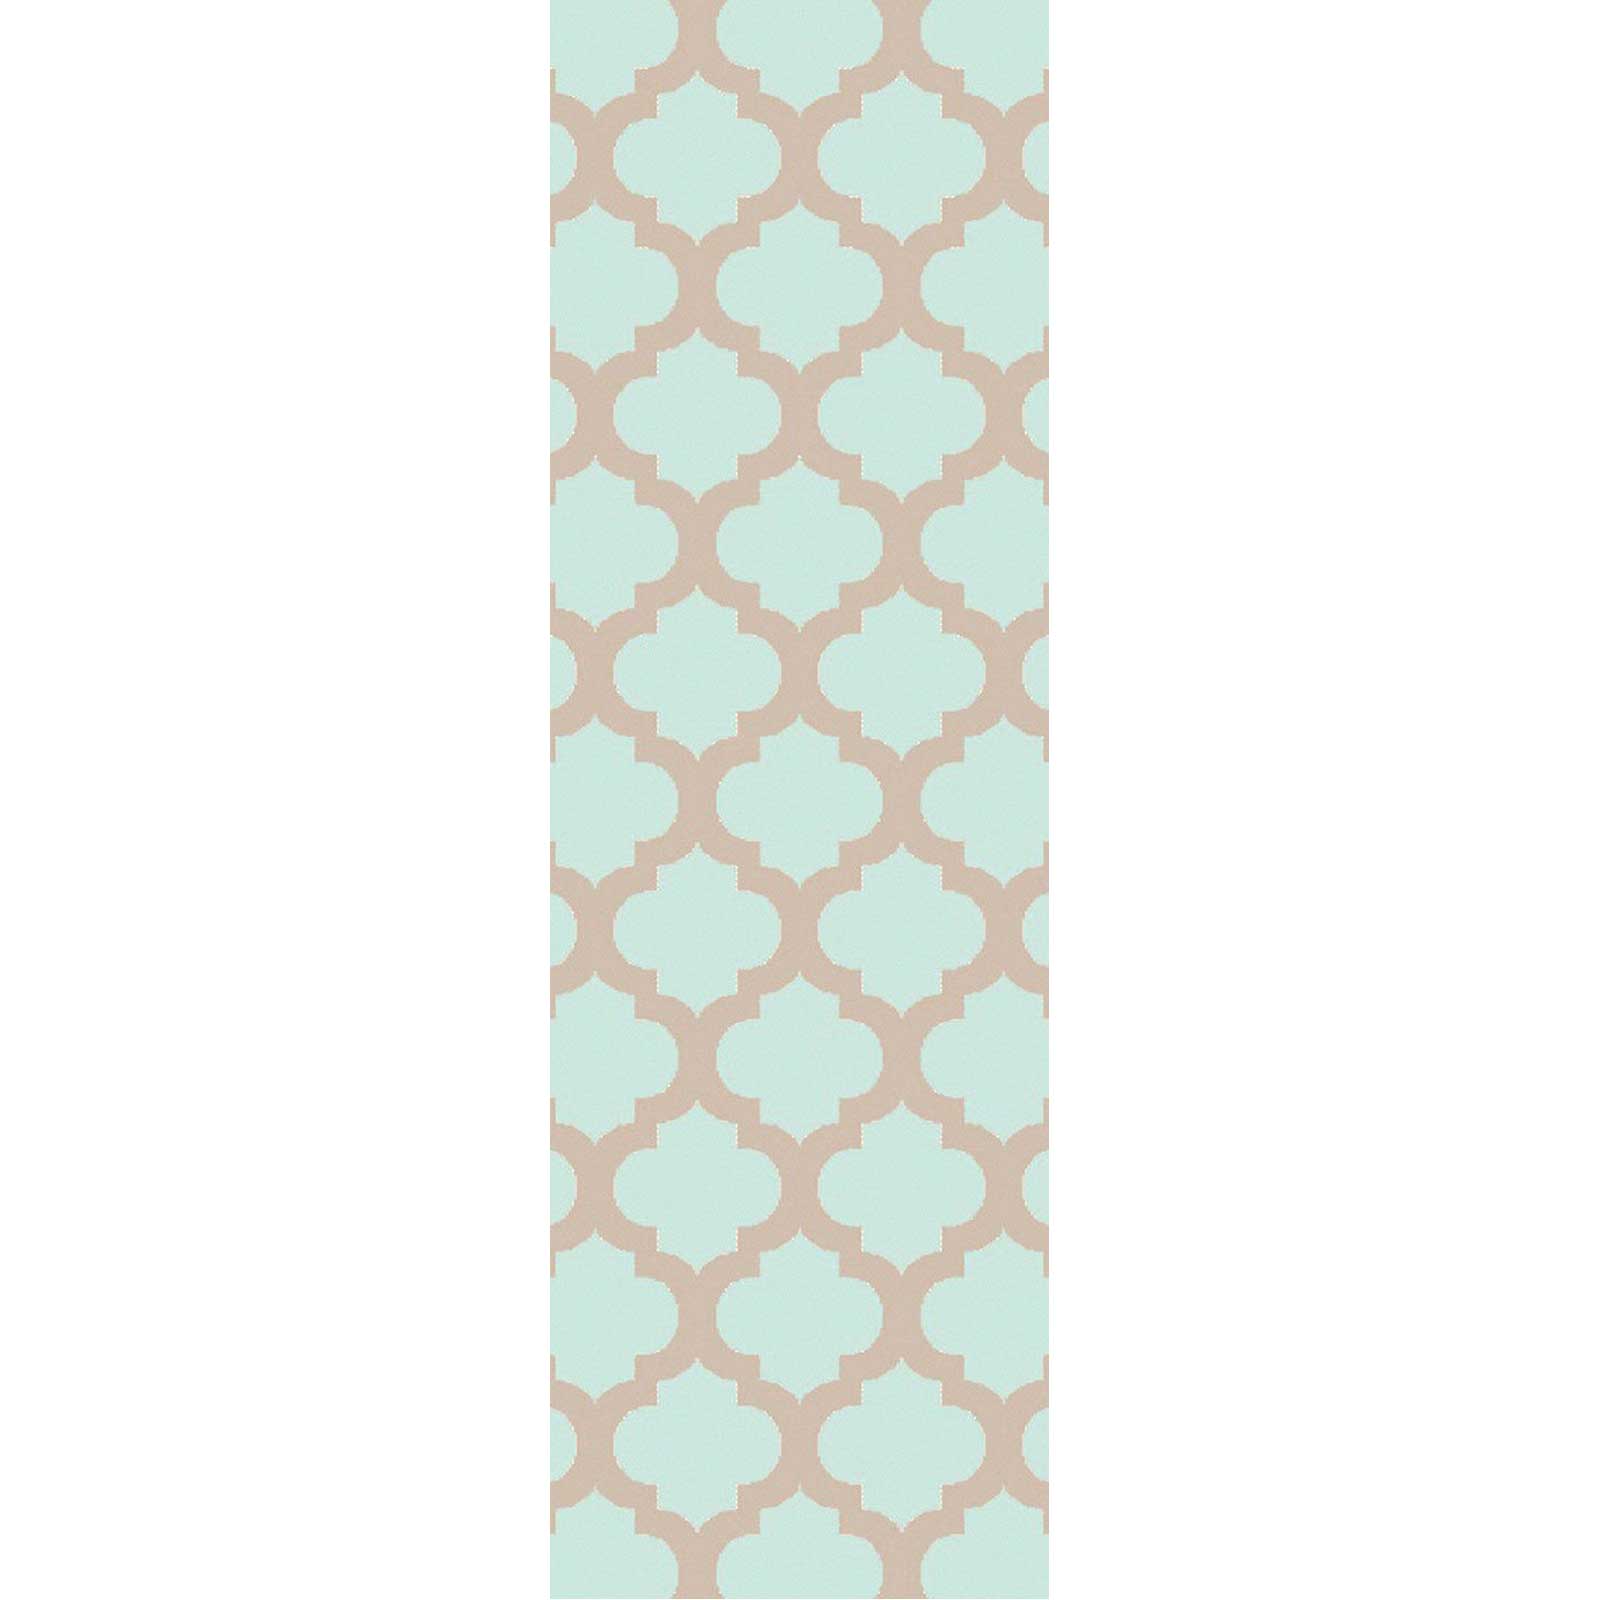 Picnic Mint/Taupe Runner Rug